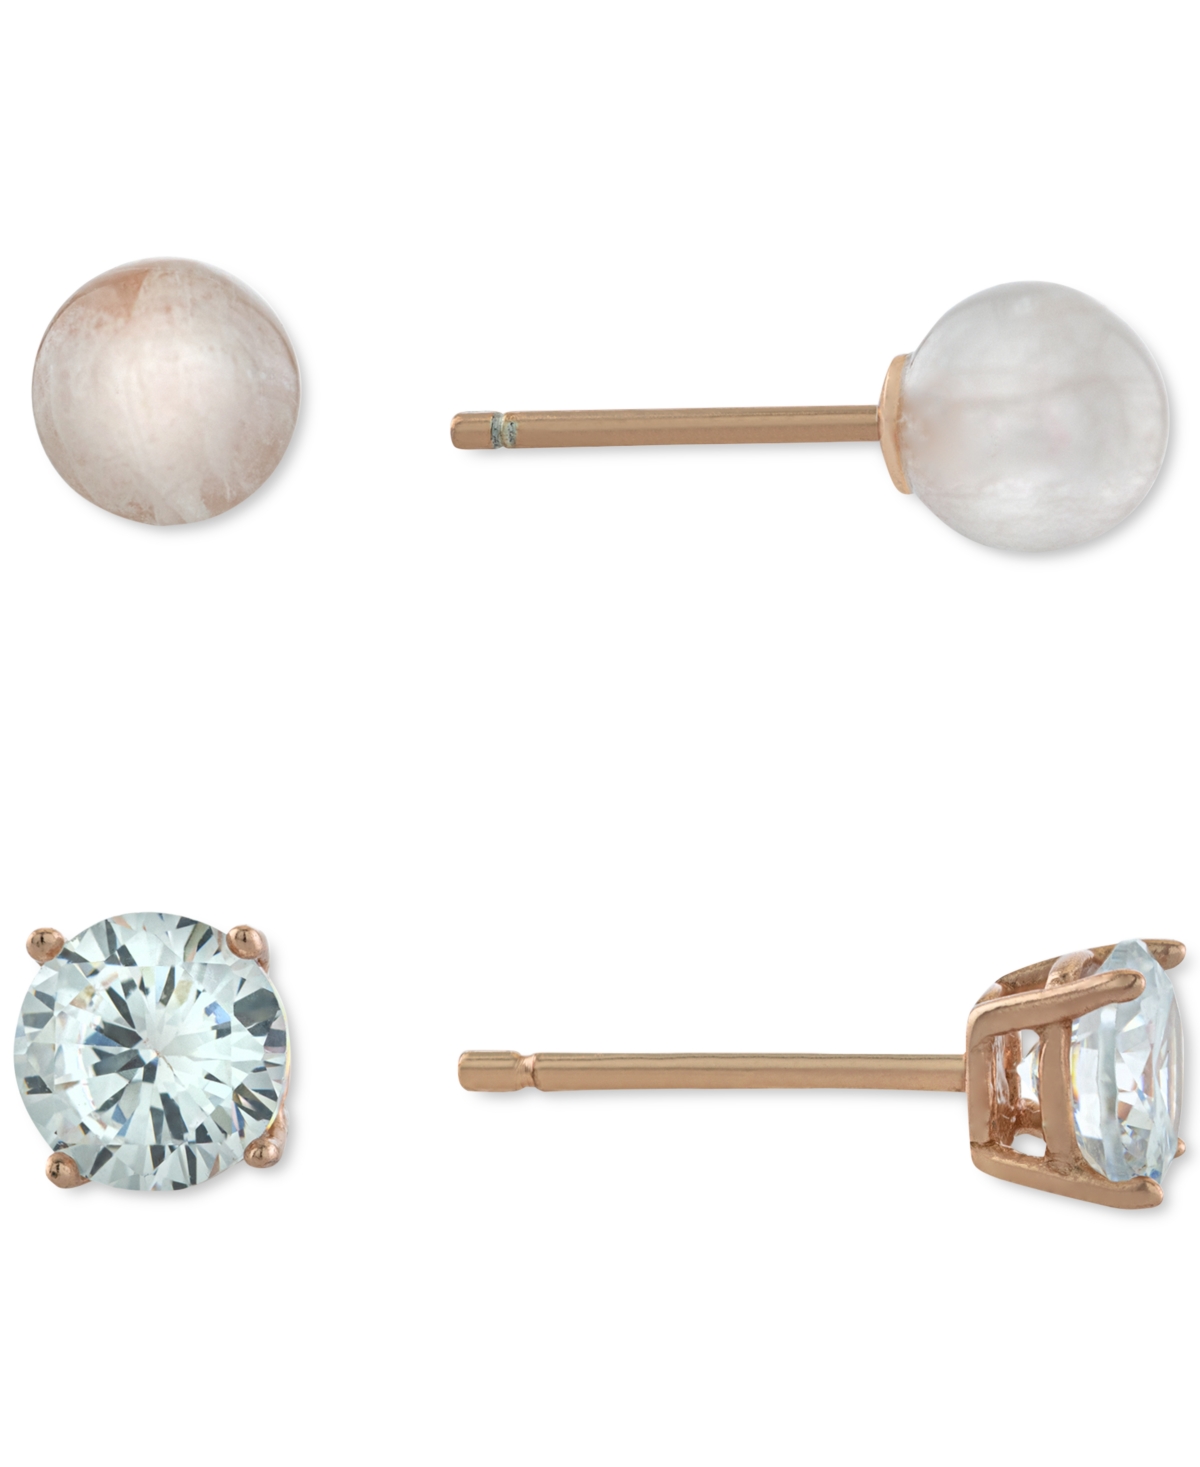 2-Pc. Cubic Zirconia & Rose Quartz Stud Earrings in Rose Gold-Plated Sterling Silver, Created for Macy's - Rose